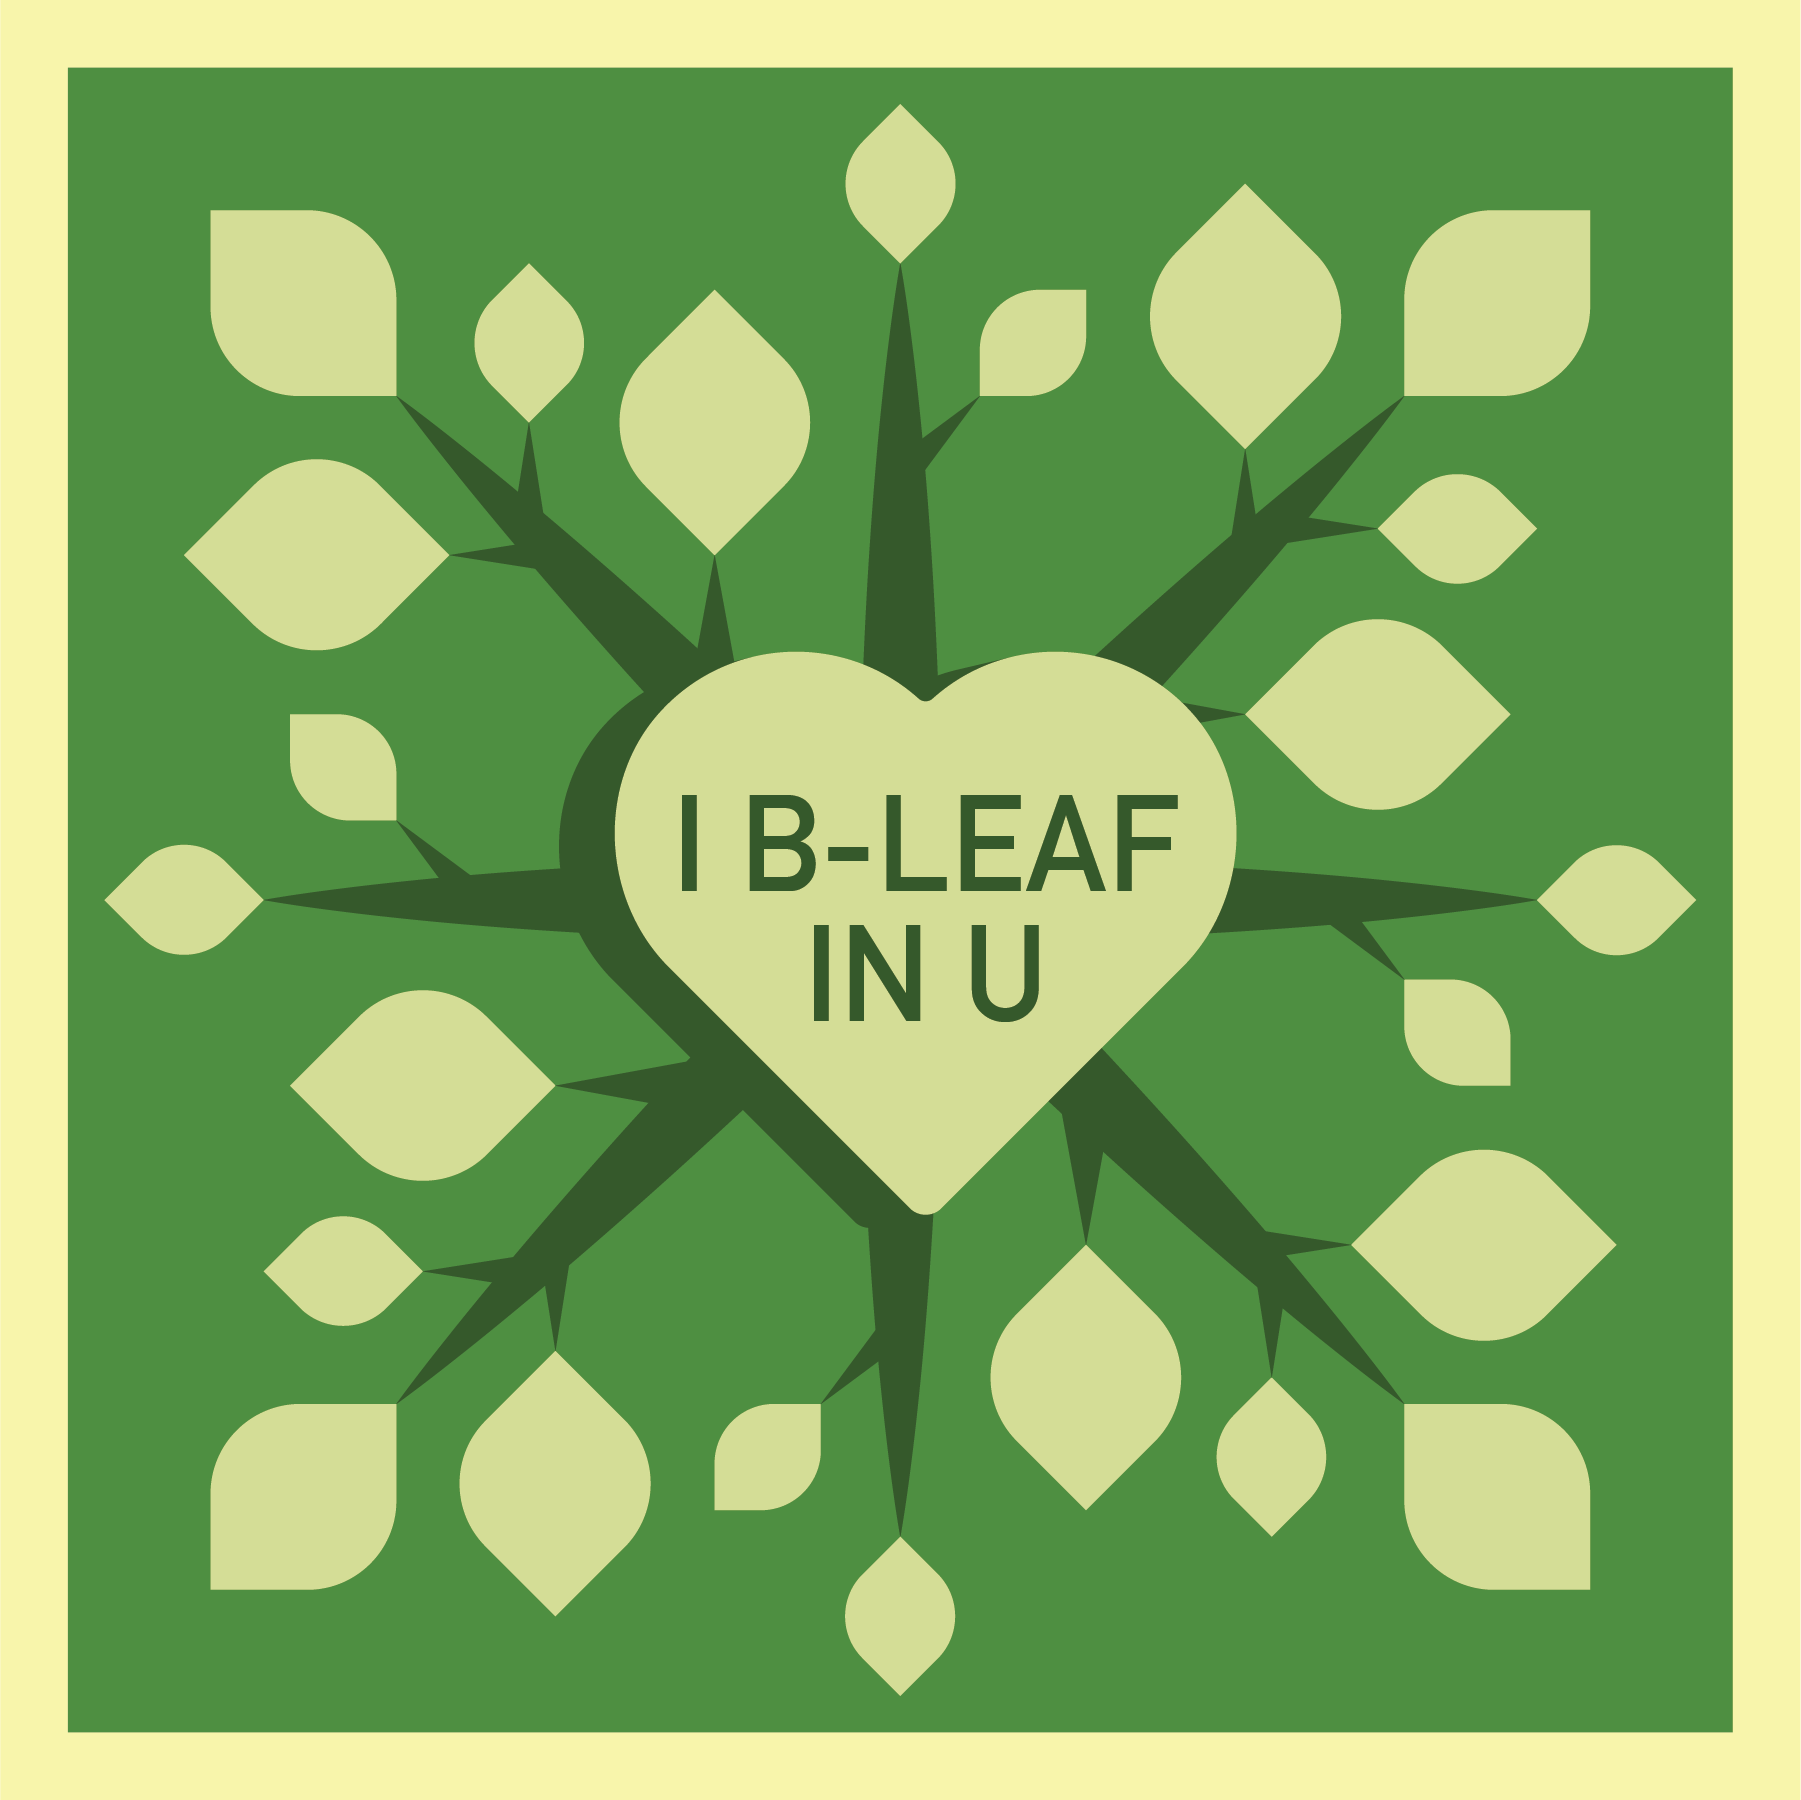 "I B-LEAF in U" with images of leaves around a heart.